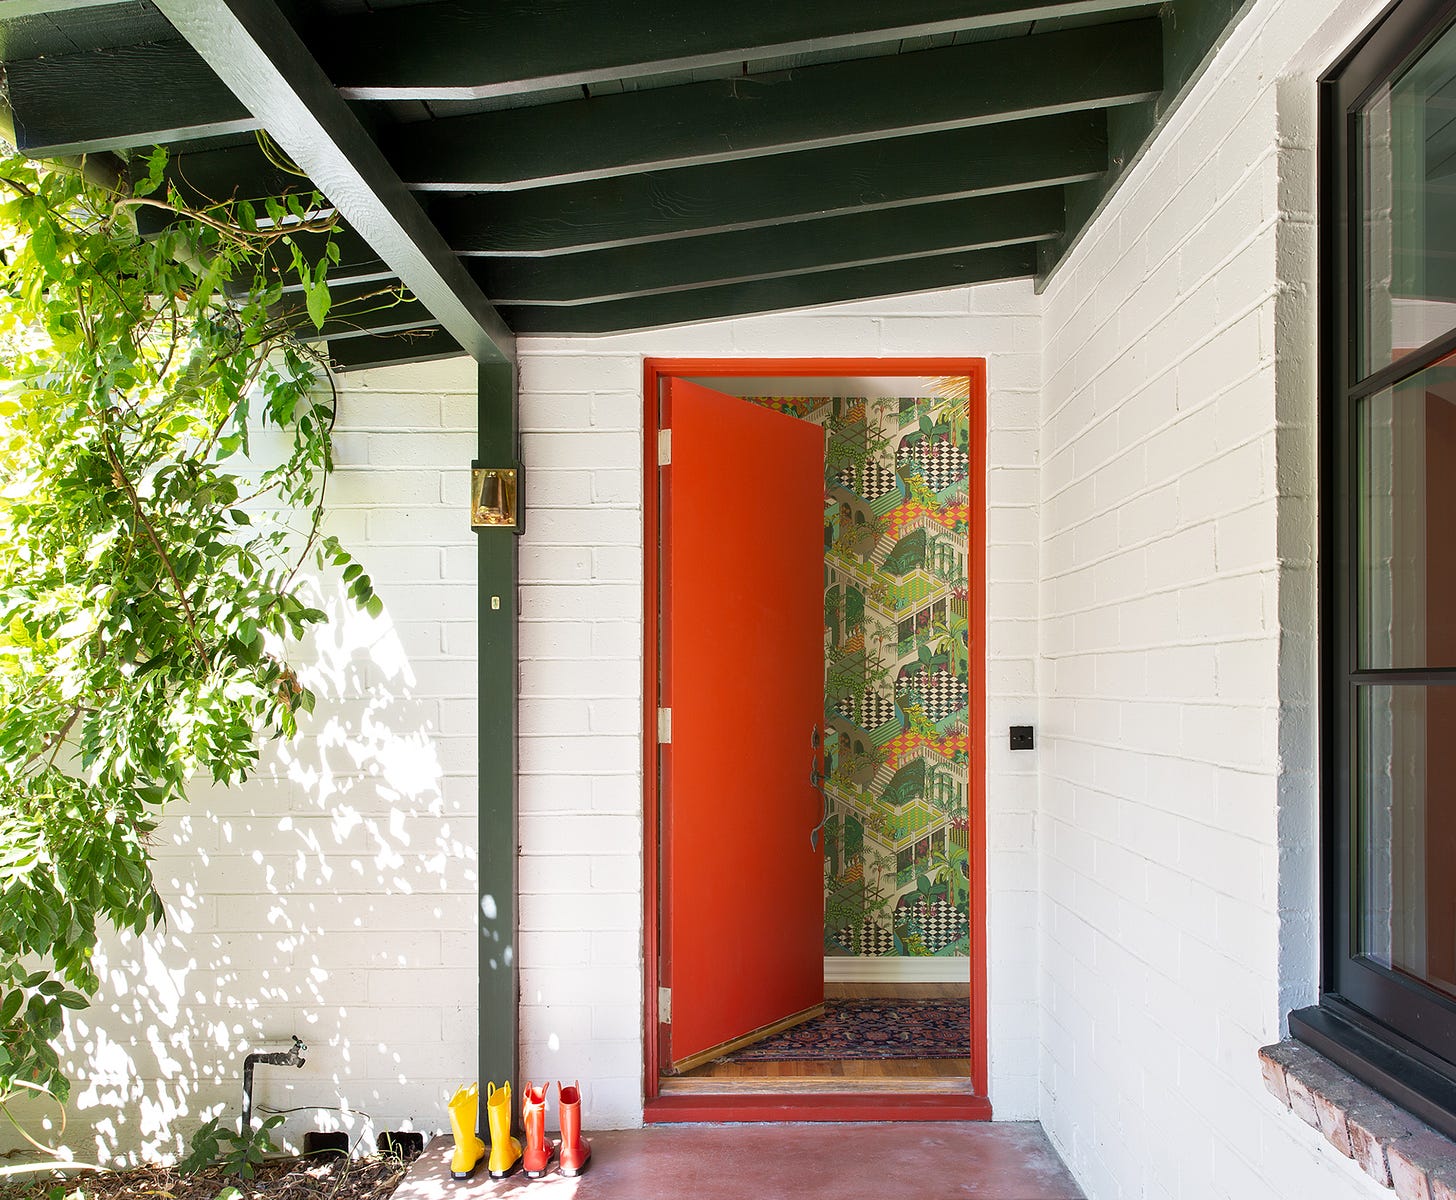 Entrance to midcentury modern home with a red door